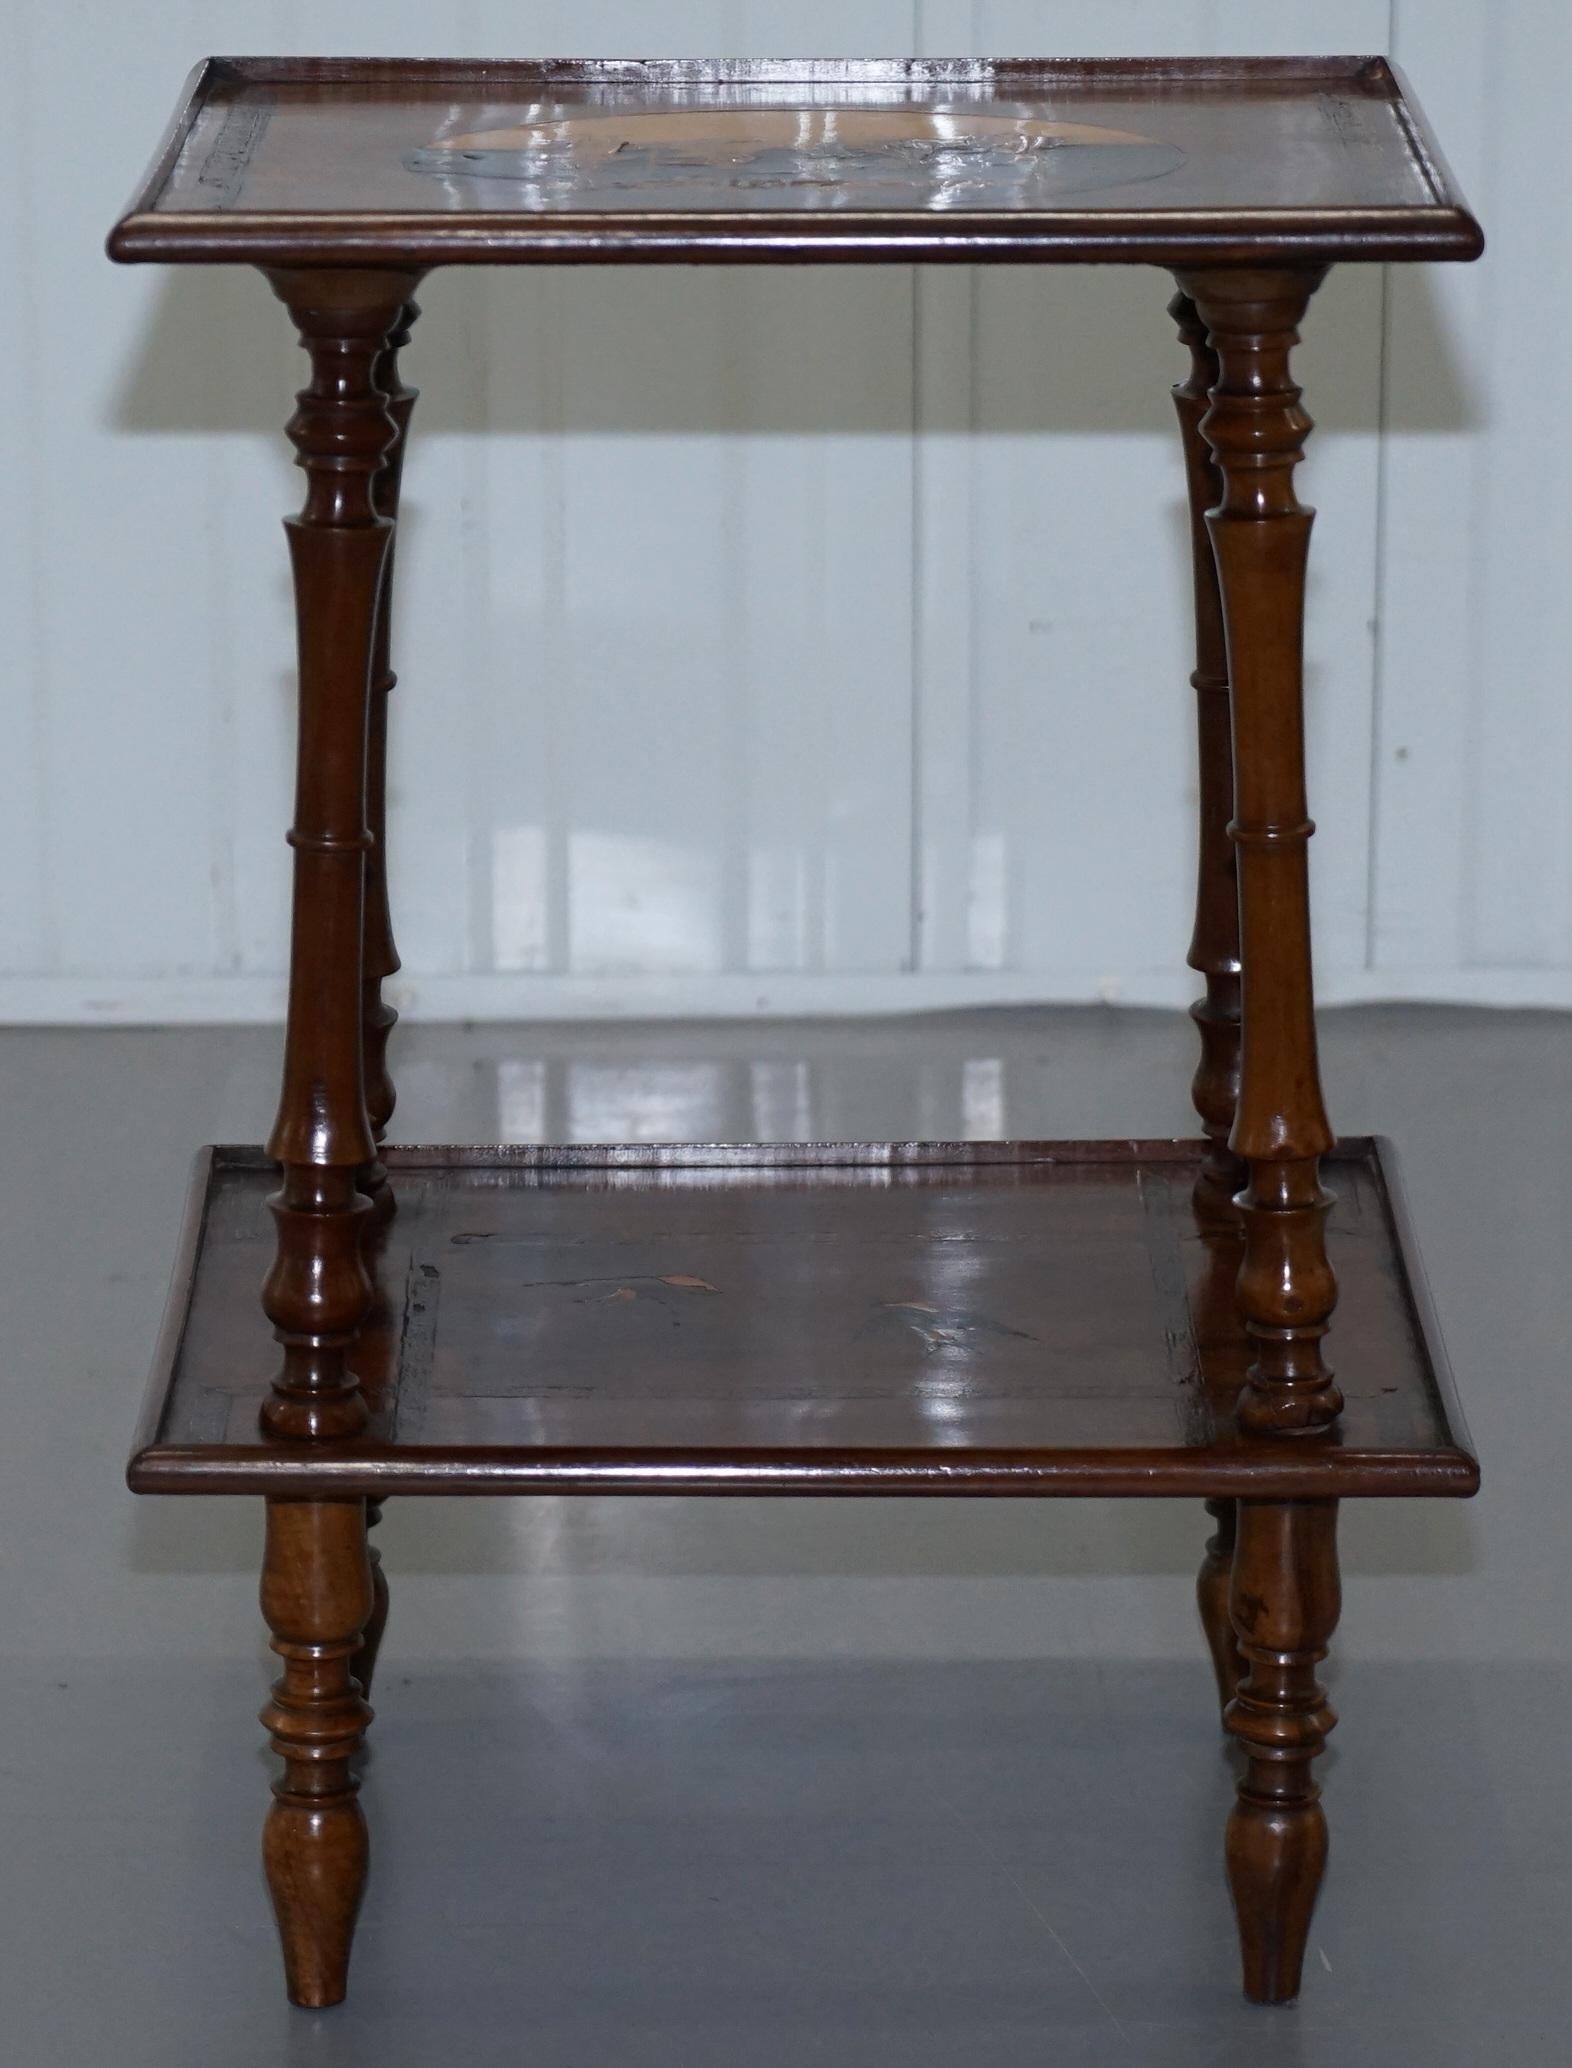 Rare 19th Century Italian Side Lamp Table Marquetry Inlaid Dancers to the Top For Sale 11